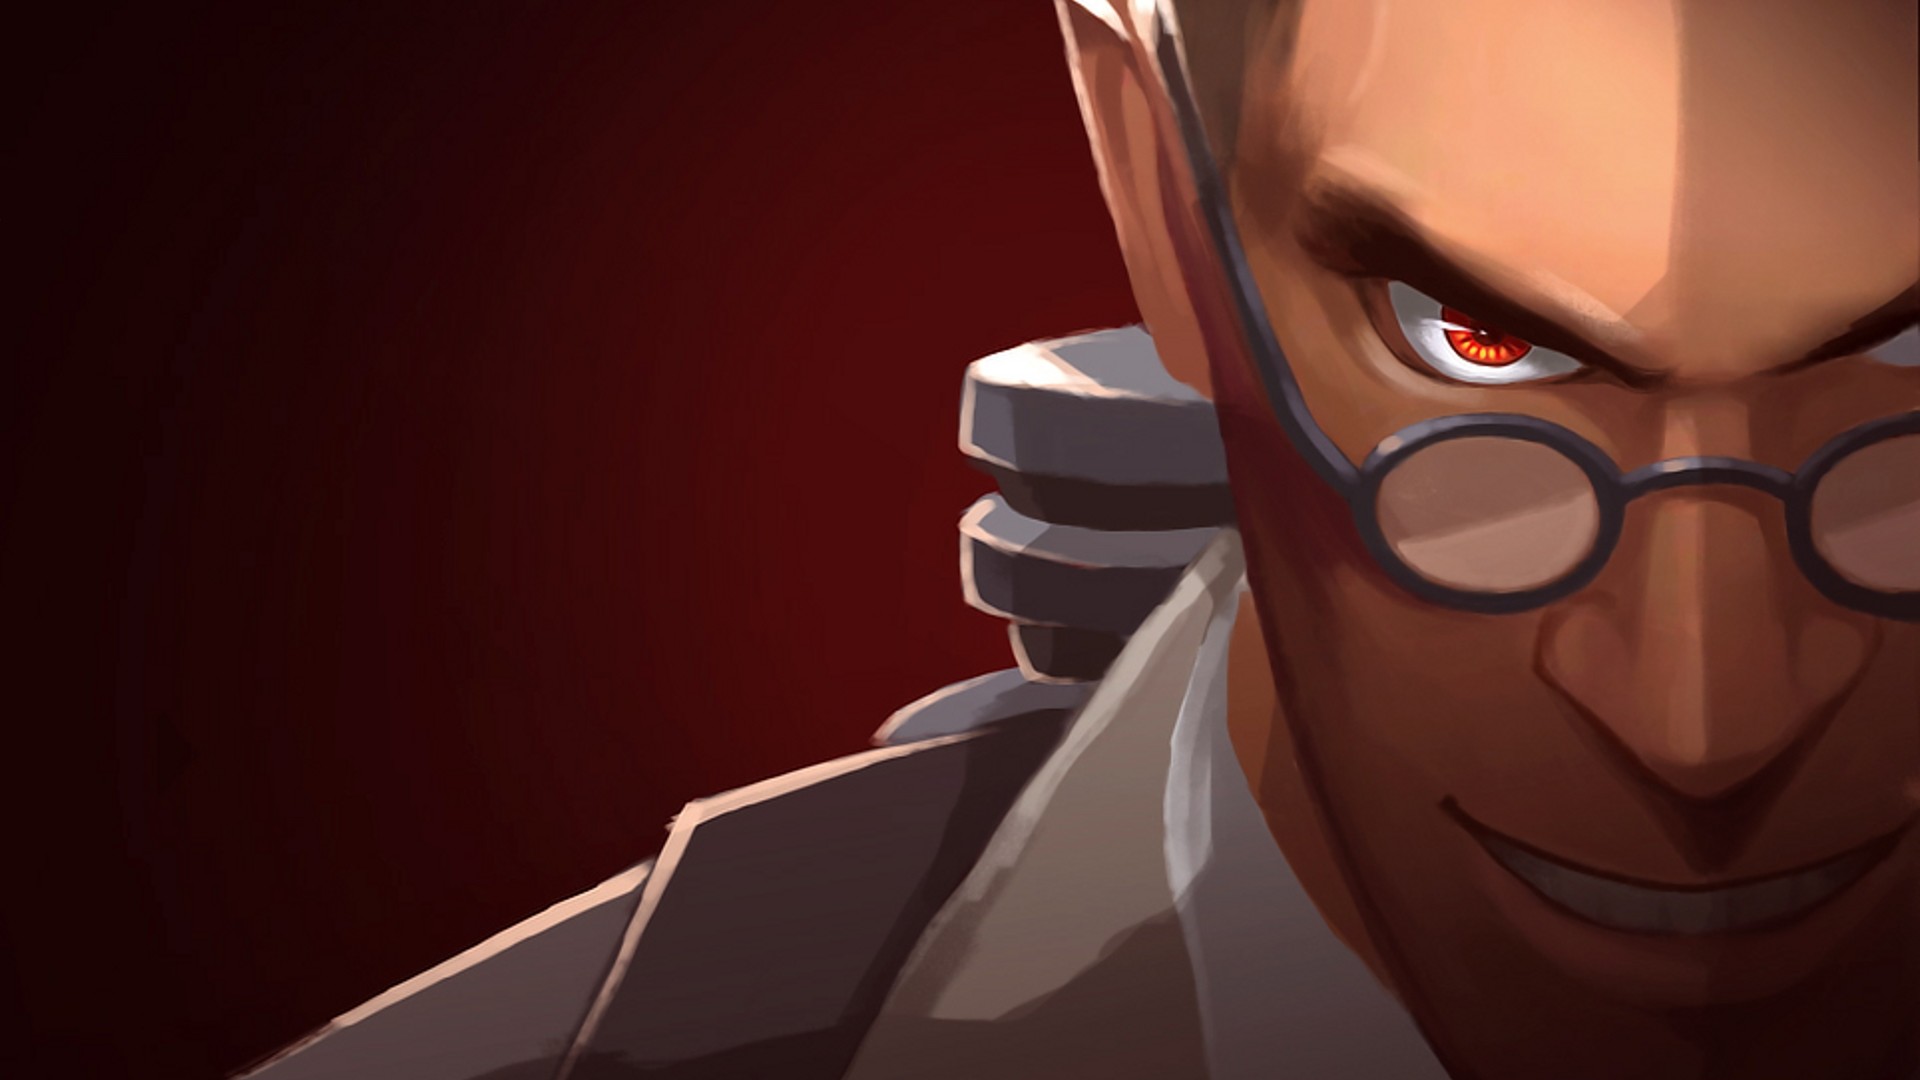 1920x1080 Team Fortress 2(TF2) images TF2 Red Medic HD wallpaper and background photos